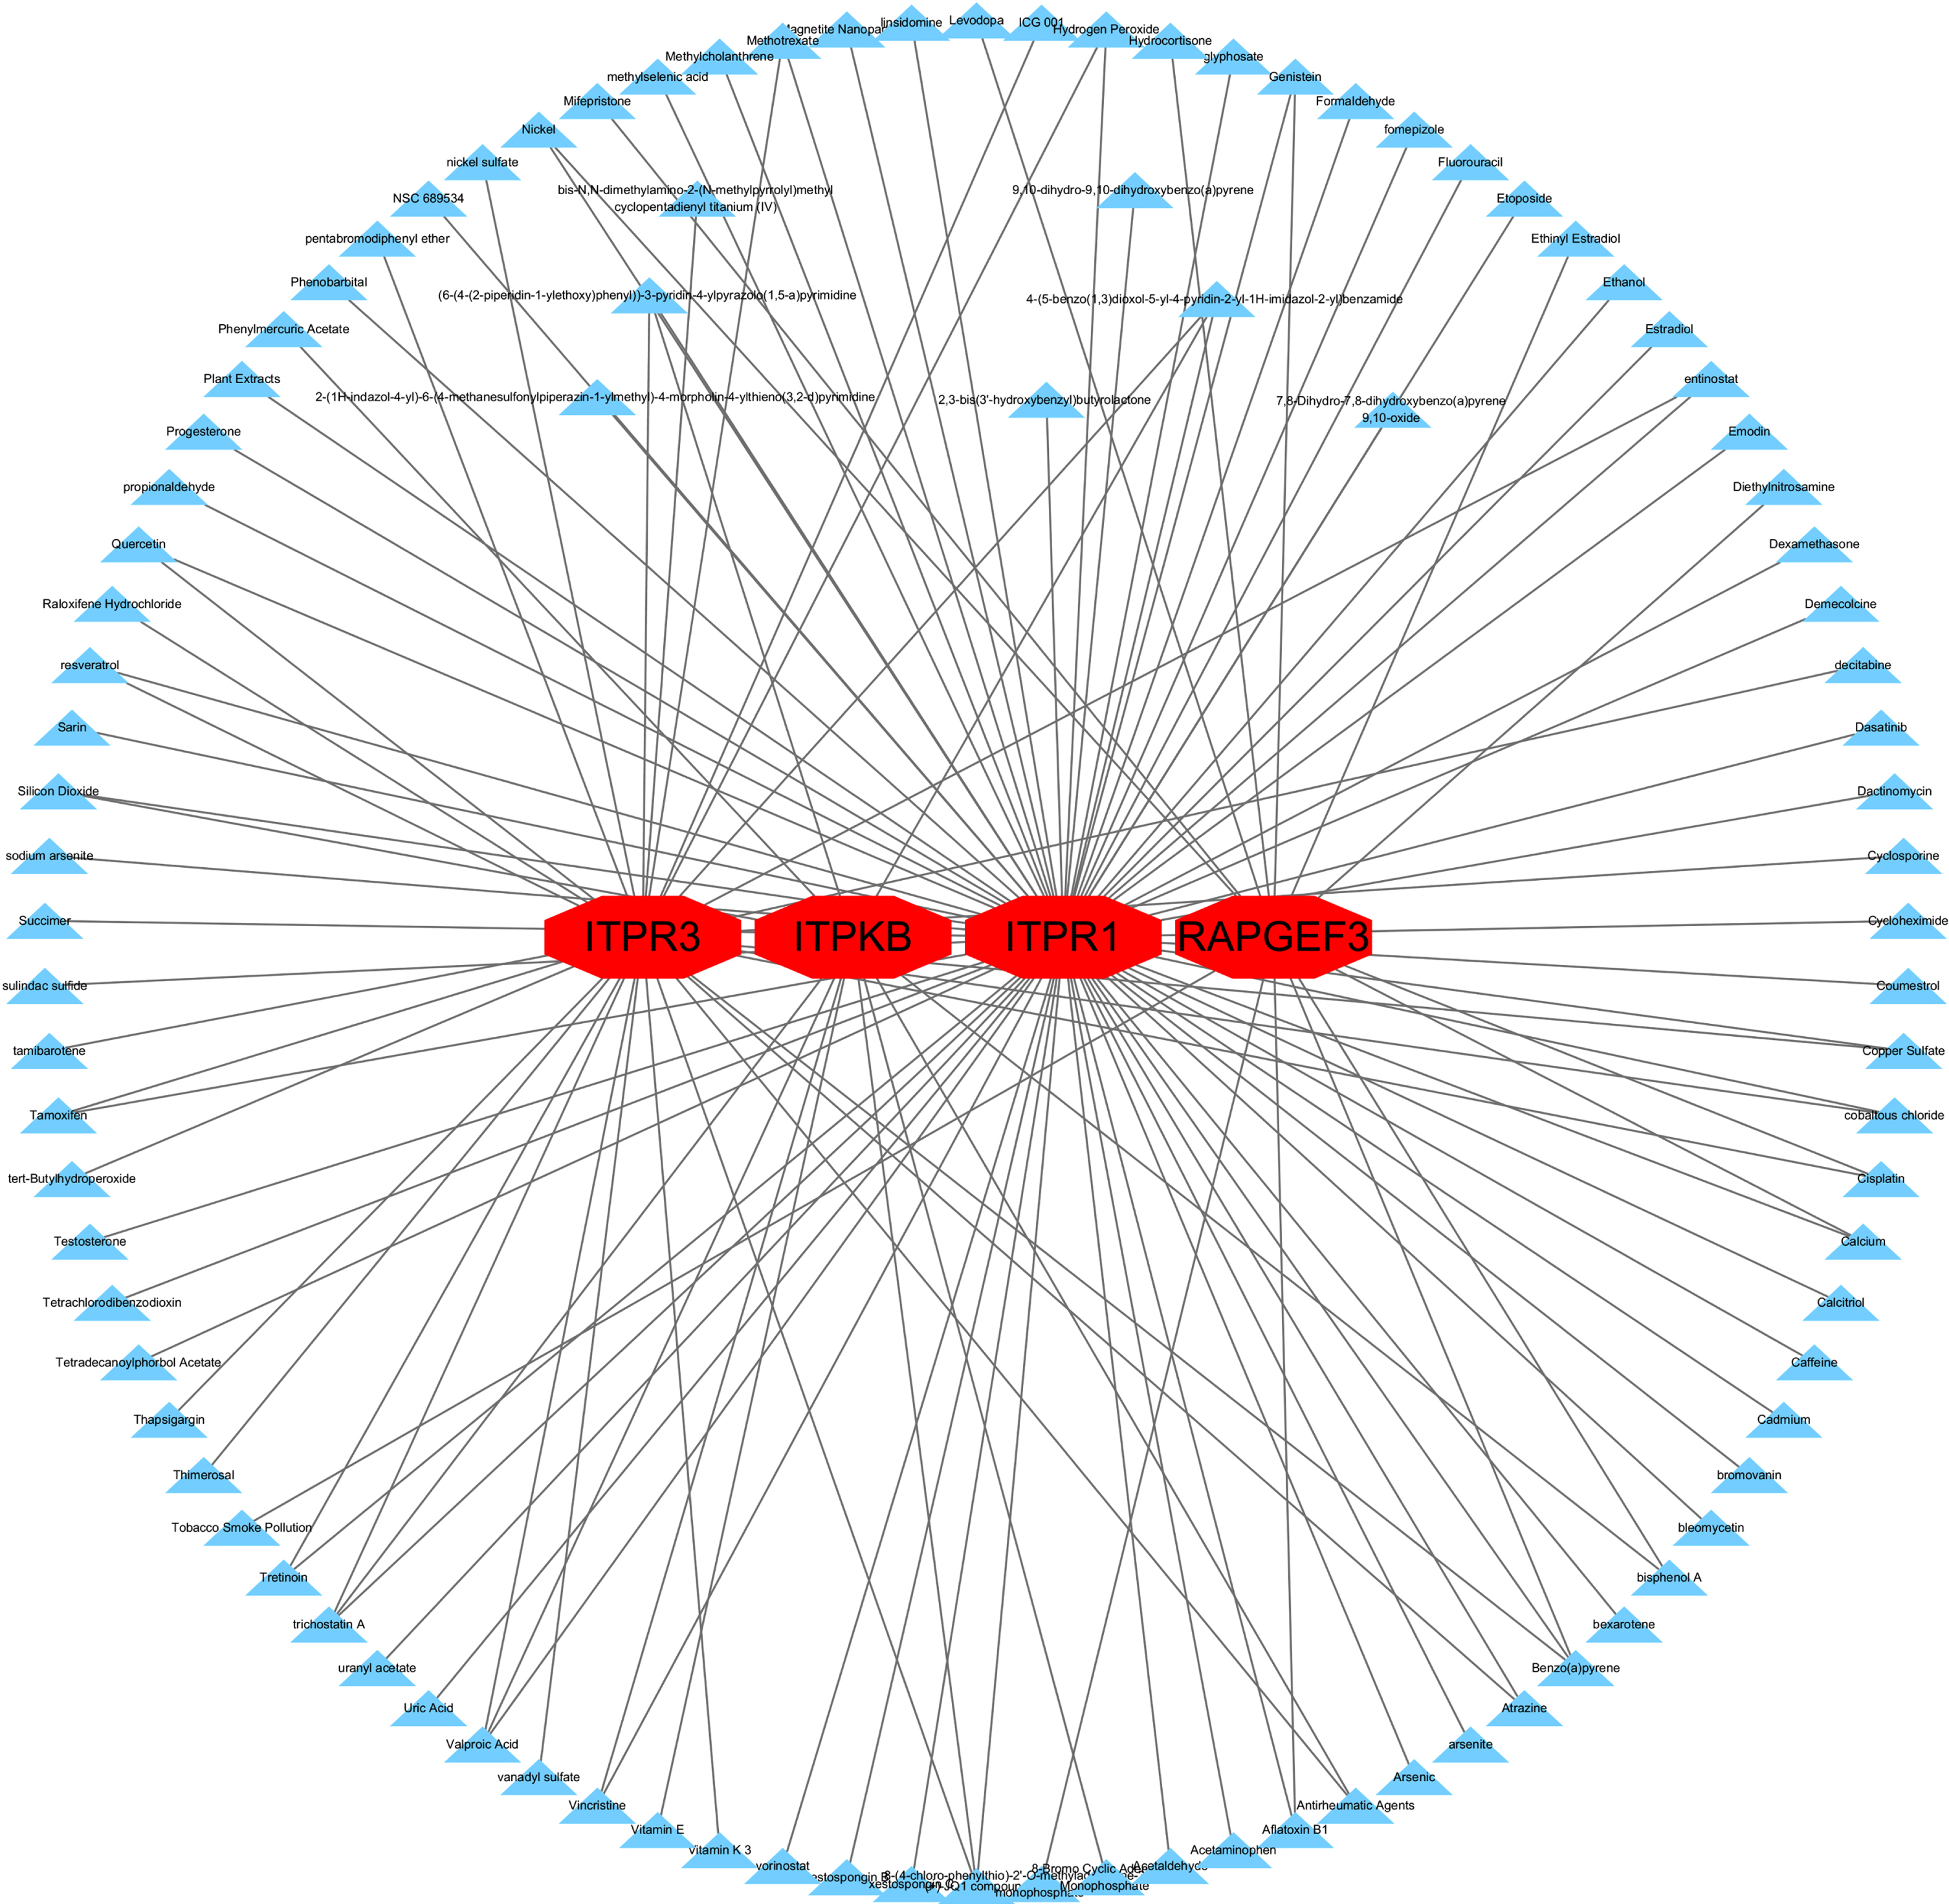 Protein-chemical Interactions by NetworkAnalyst. Suggested compounds that interact with hub genes.